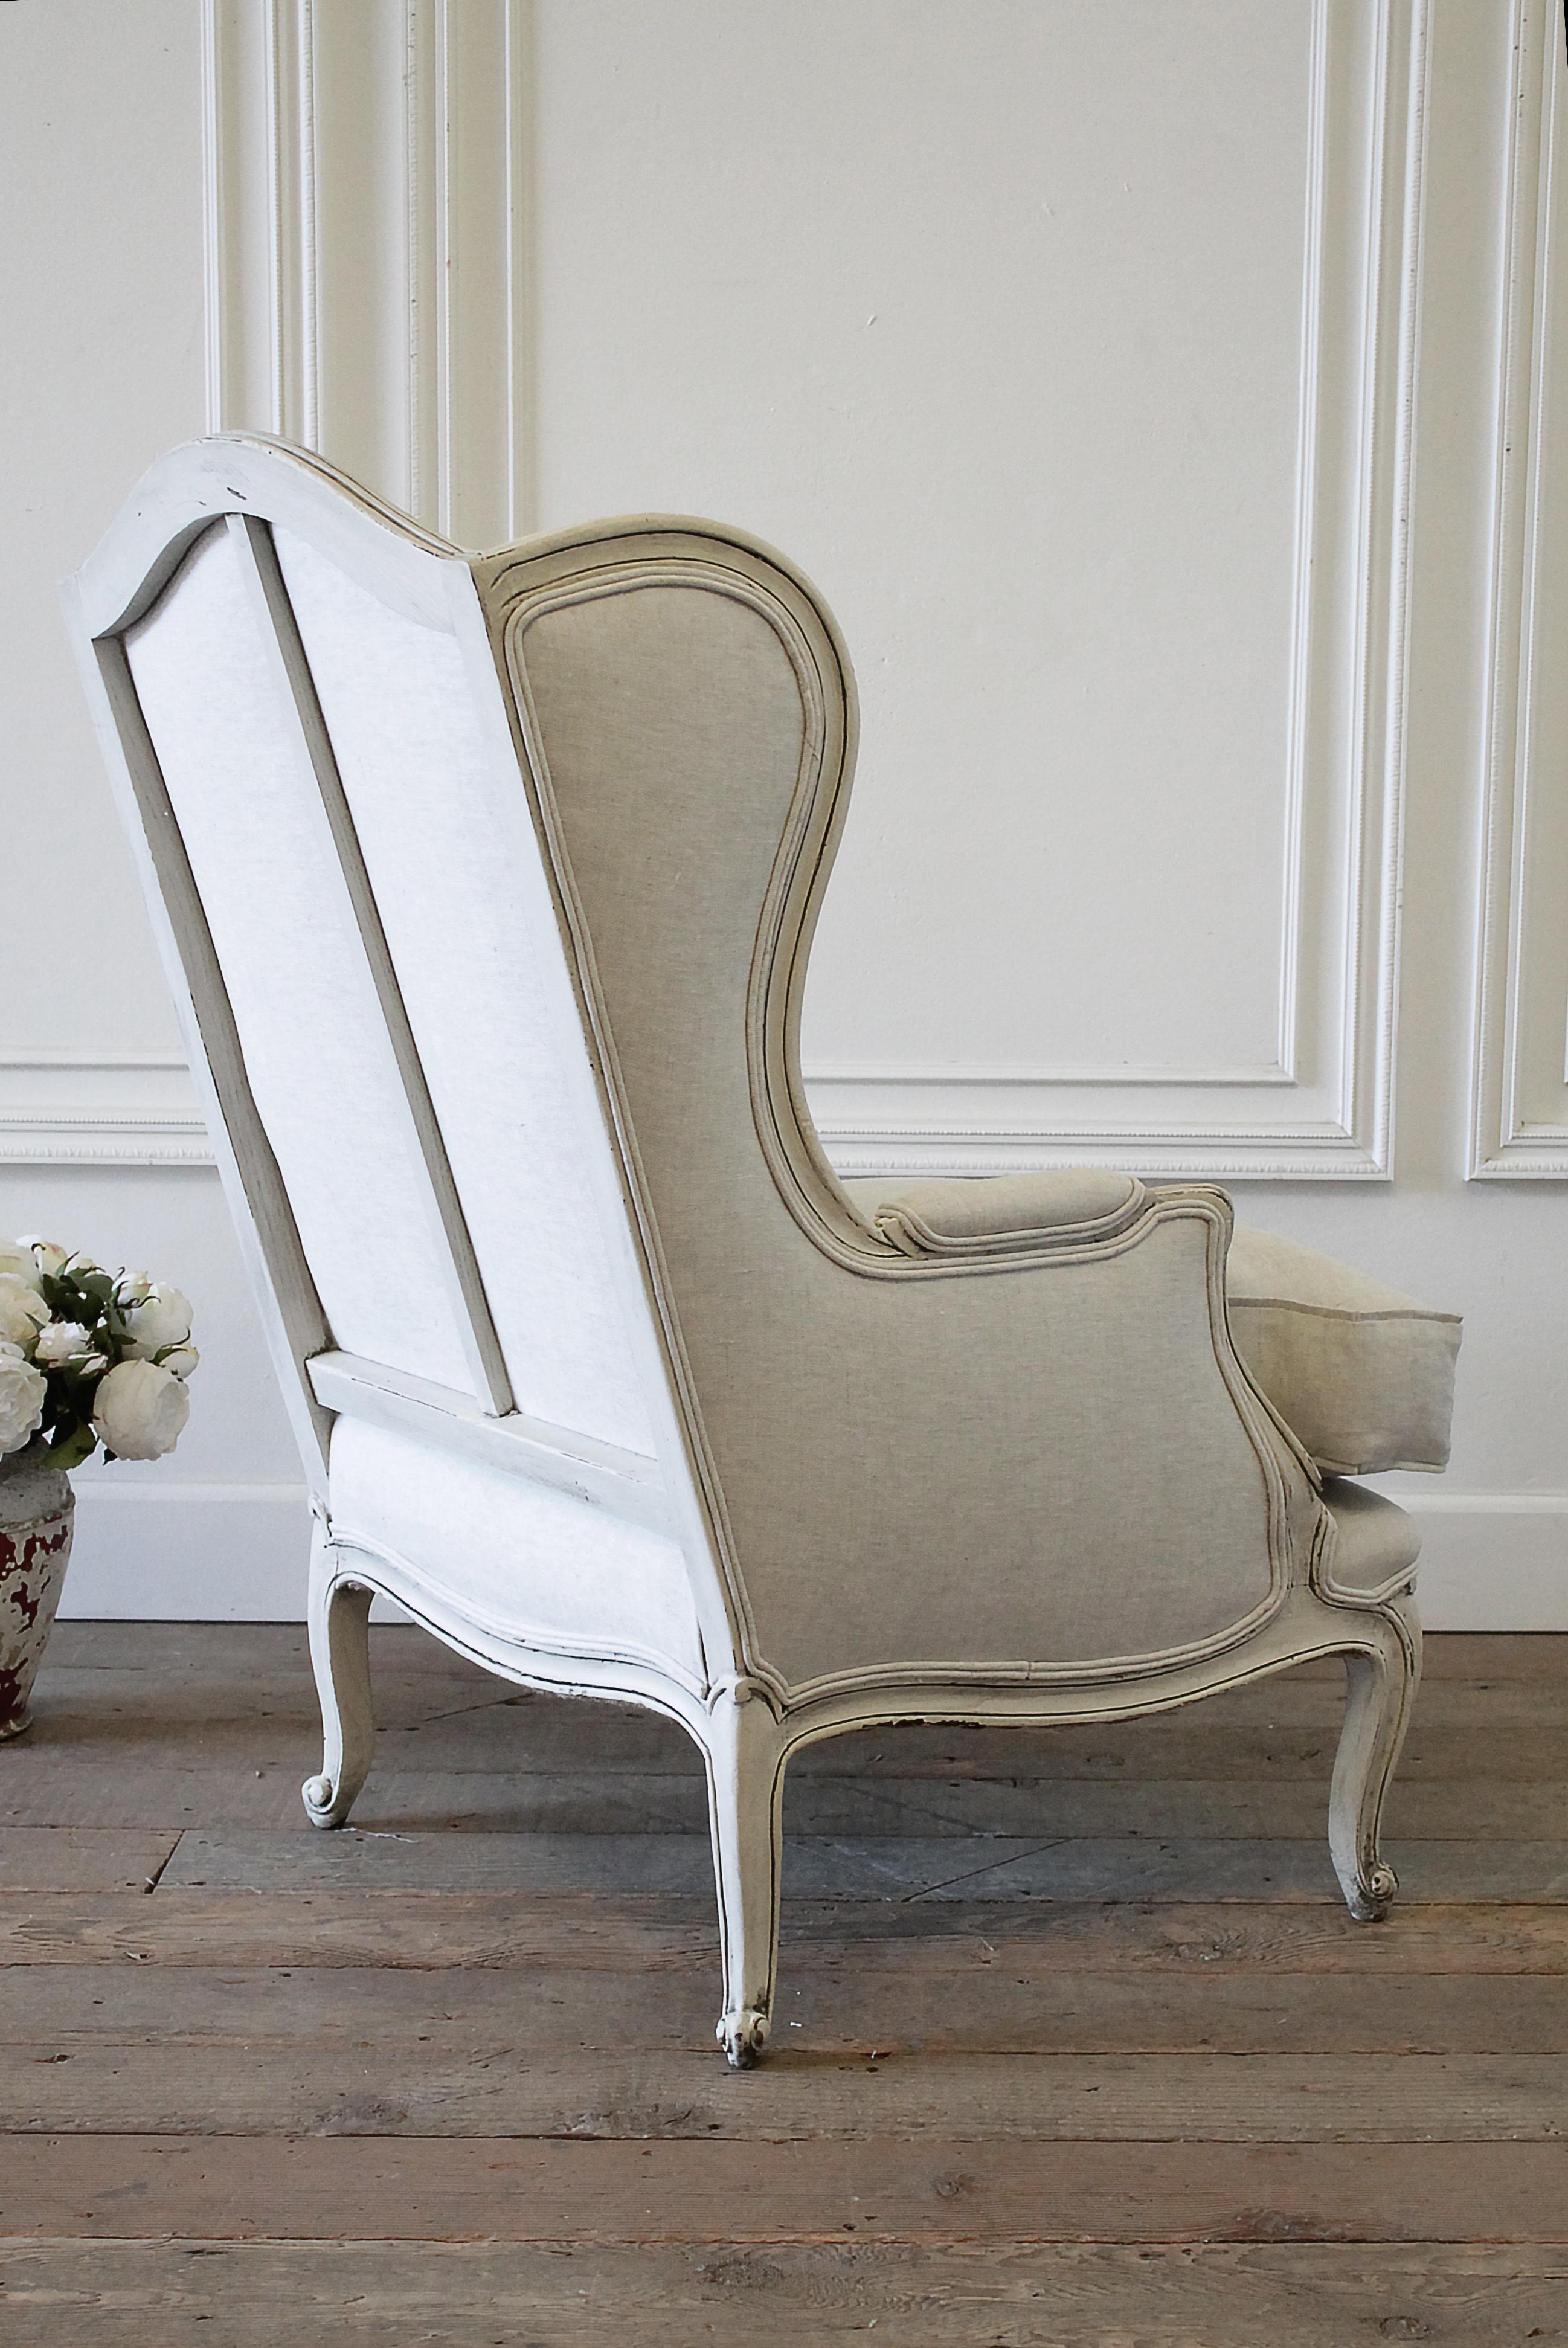 Vintage French Provincial Wingback Style Chair Upholstered in Natural Linen 4